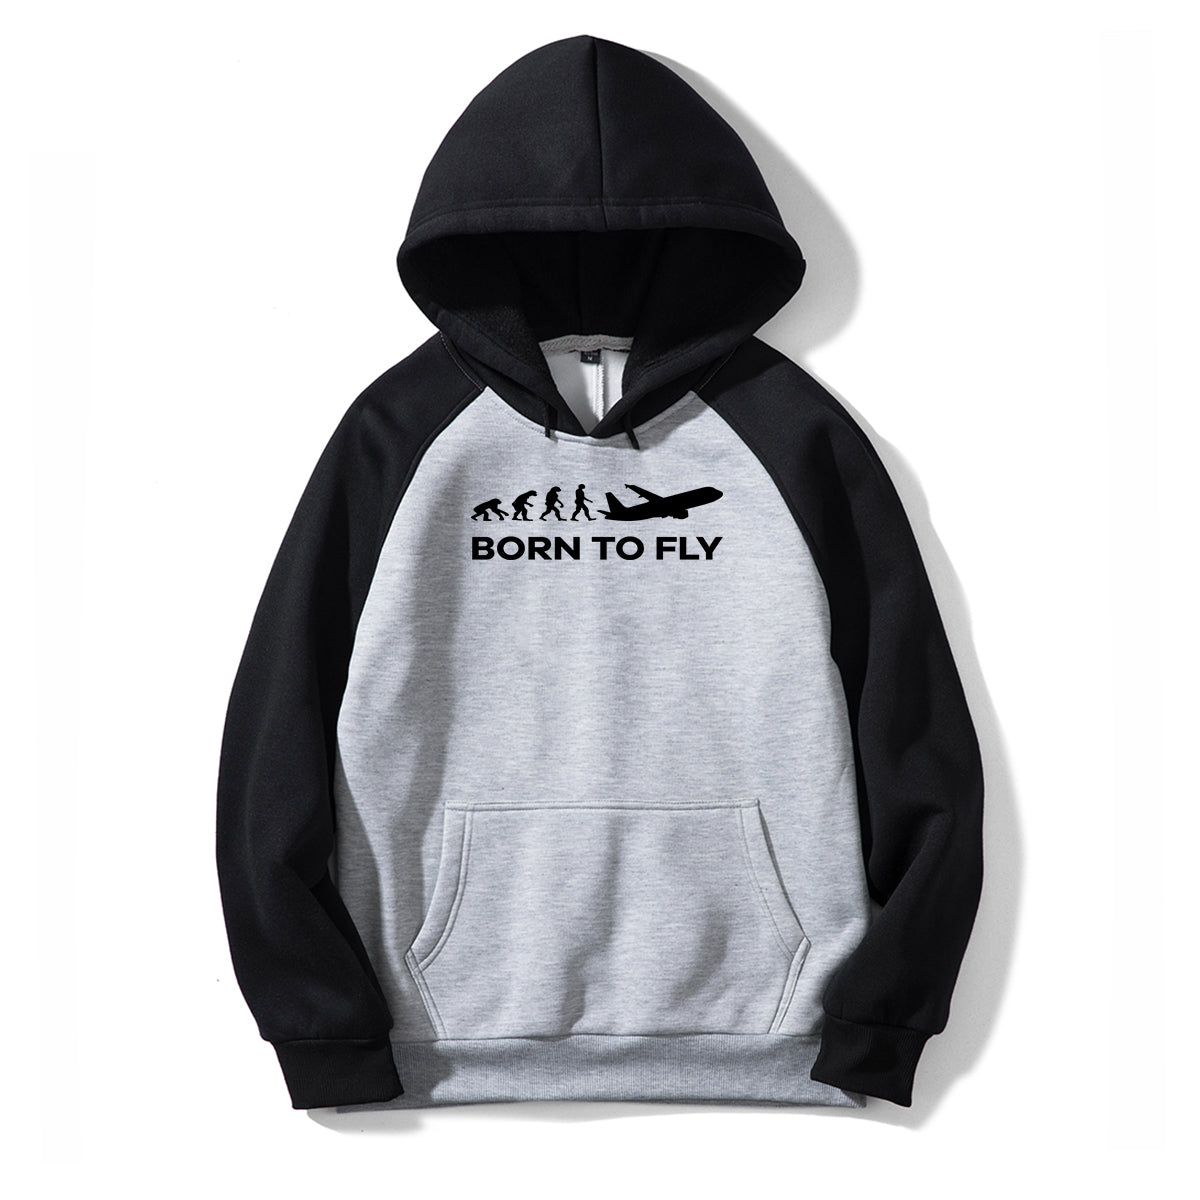 Born To Fly Designed Colourful Hoodies